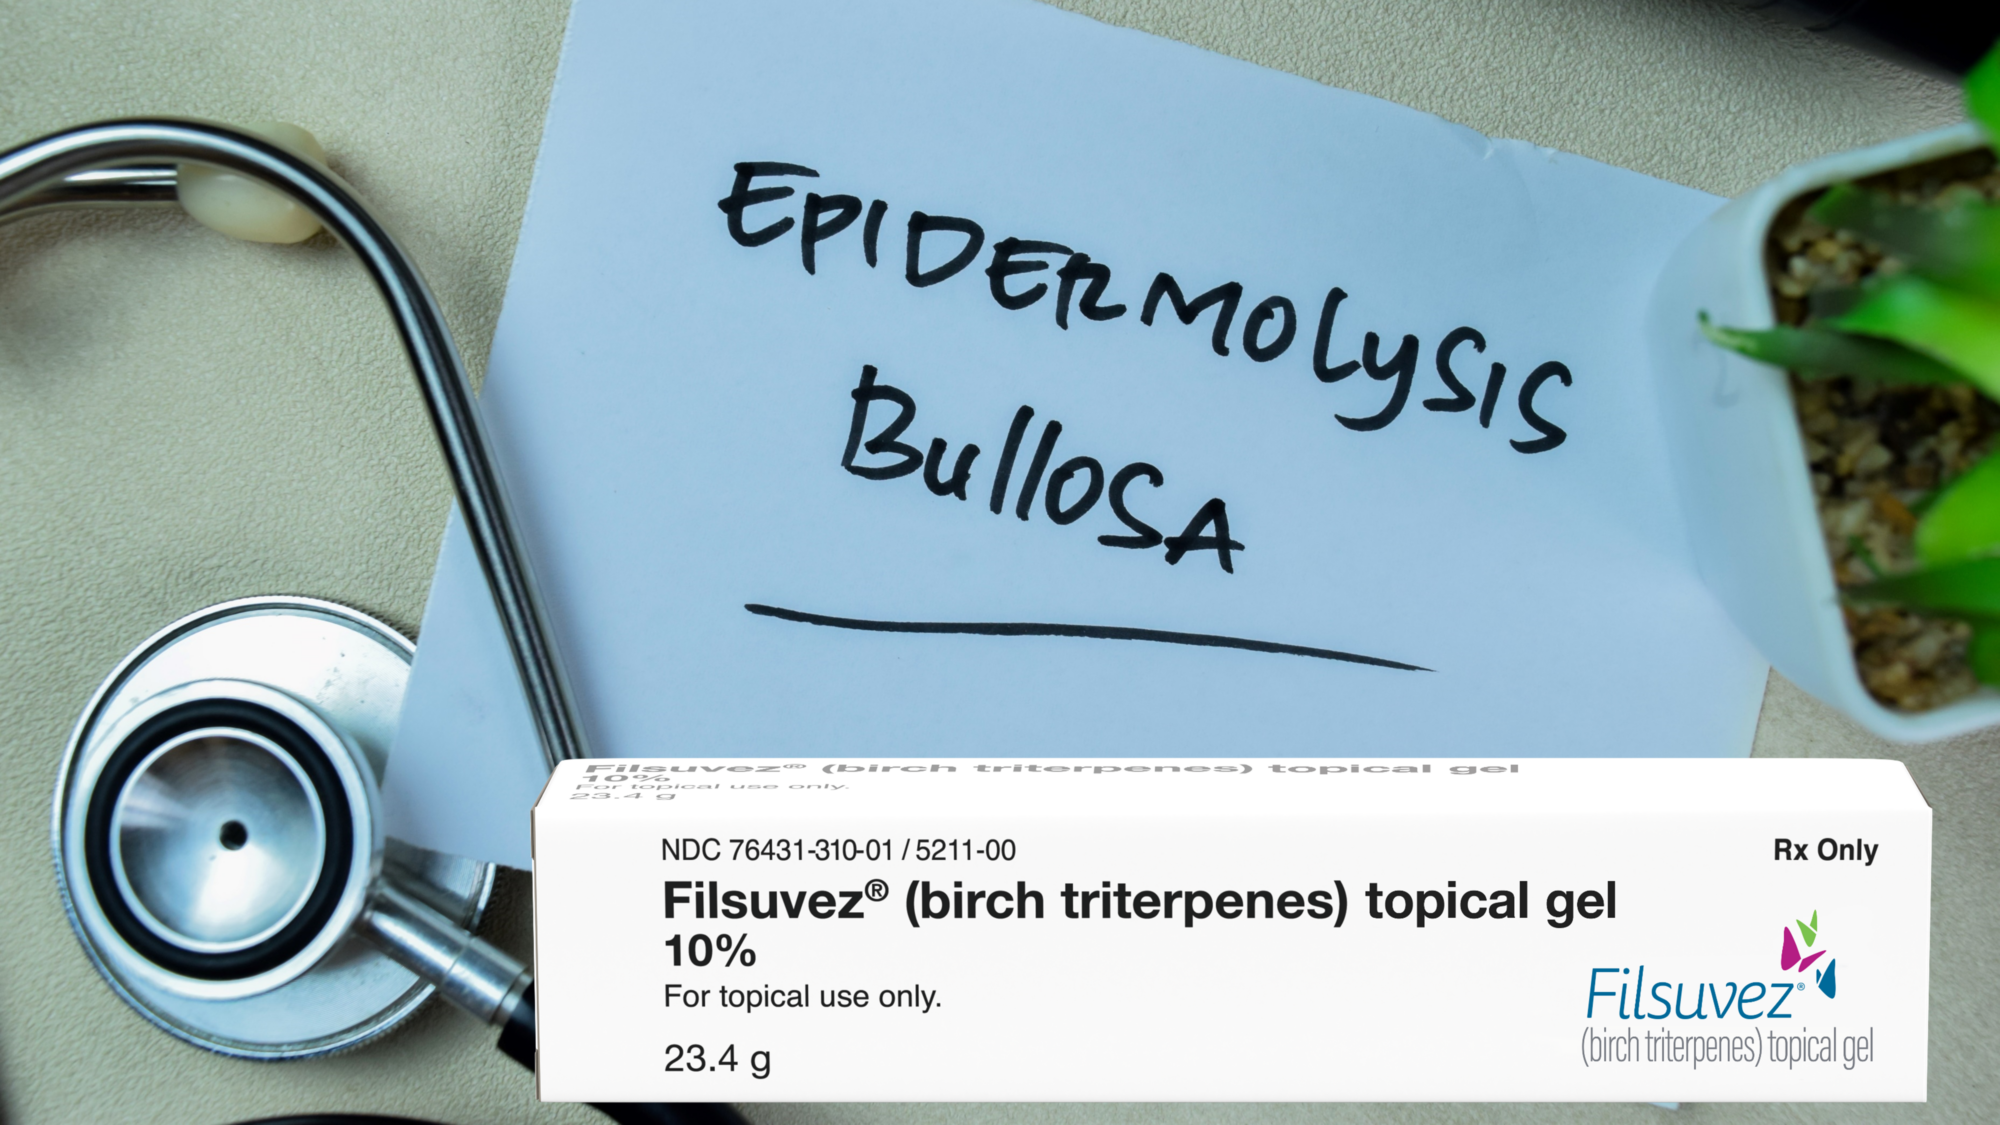 Filsuvez (birch triterpenes) is a new topical gel for treating junctional epidermolysis bullosa (JEB) and dystrophic epidermolysis bullosa (DEB).